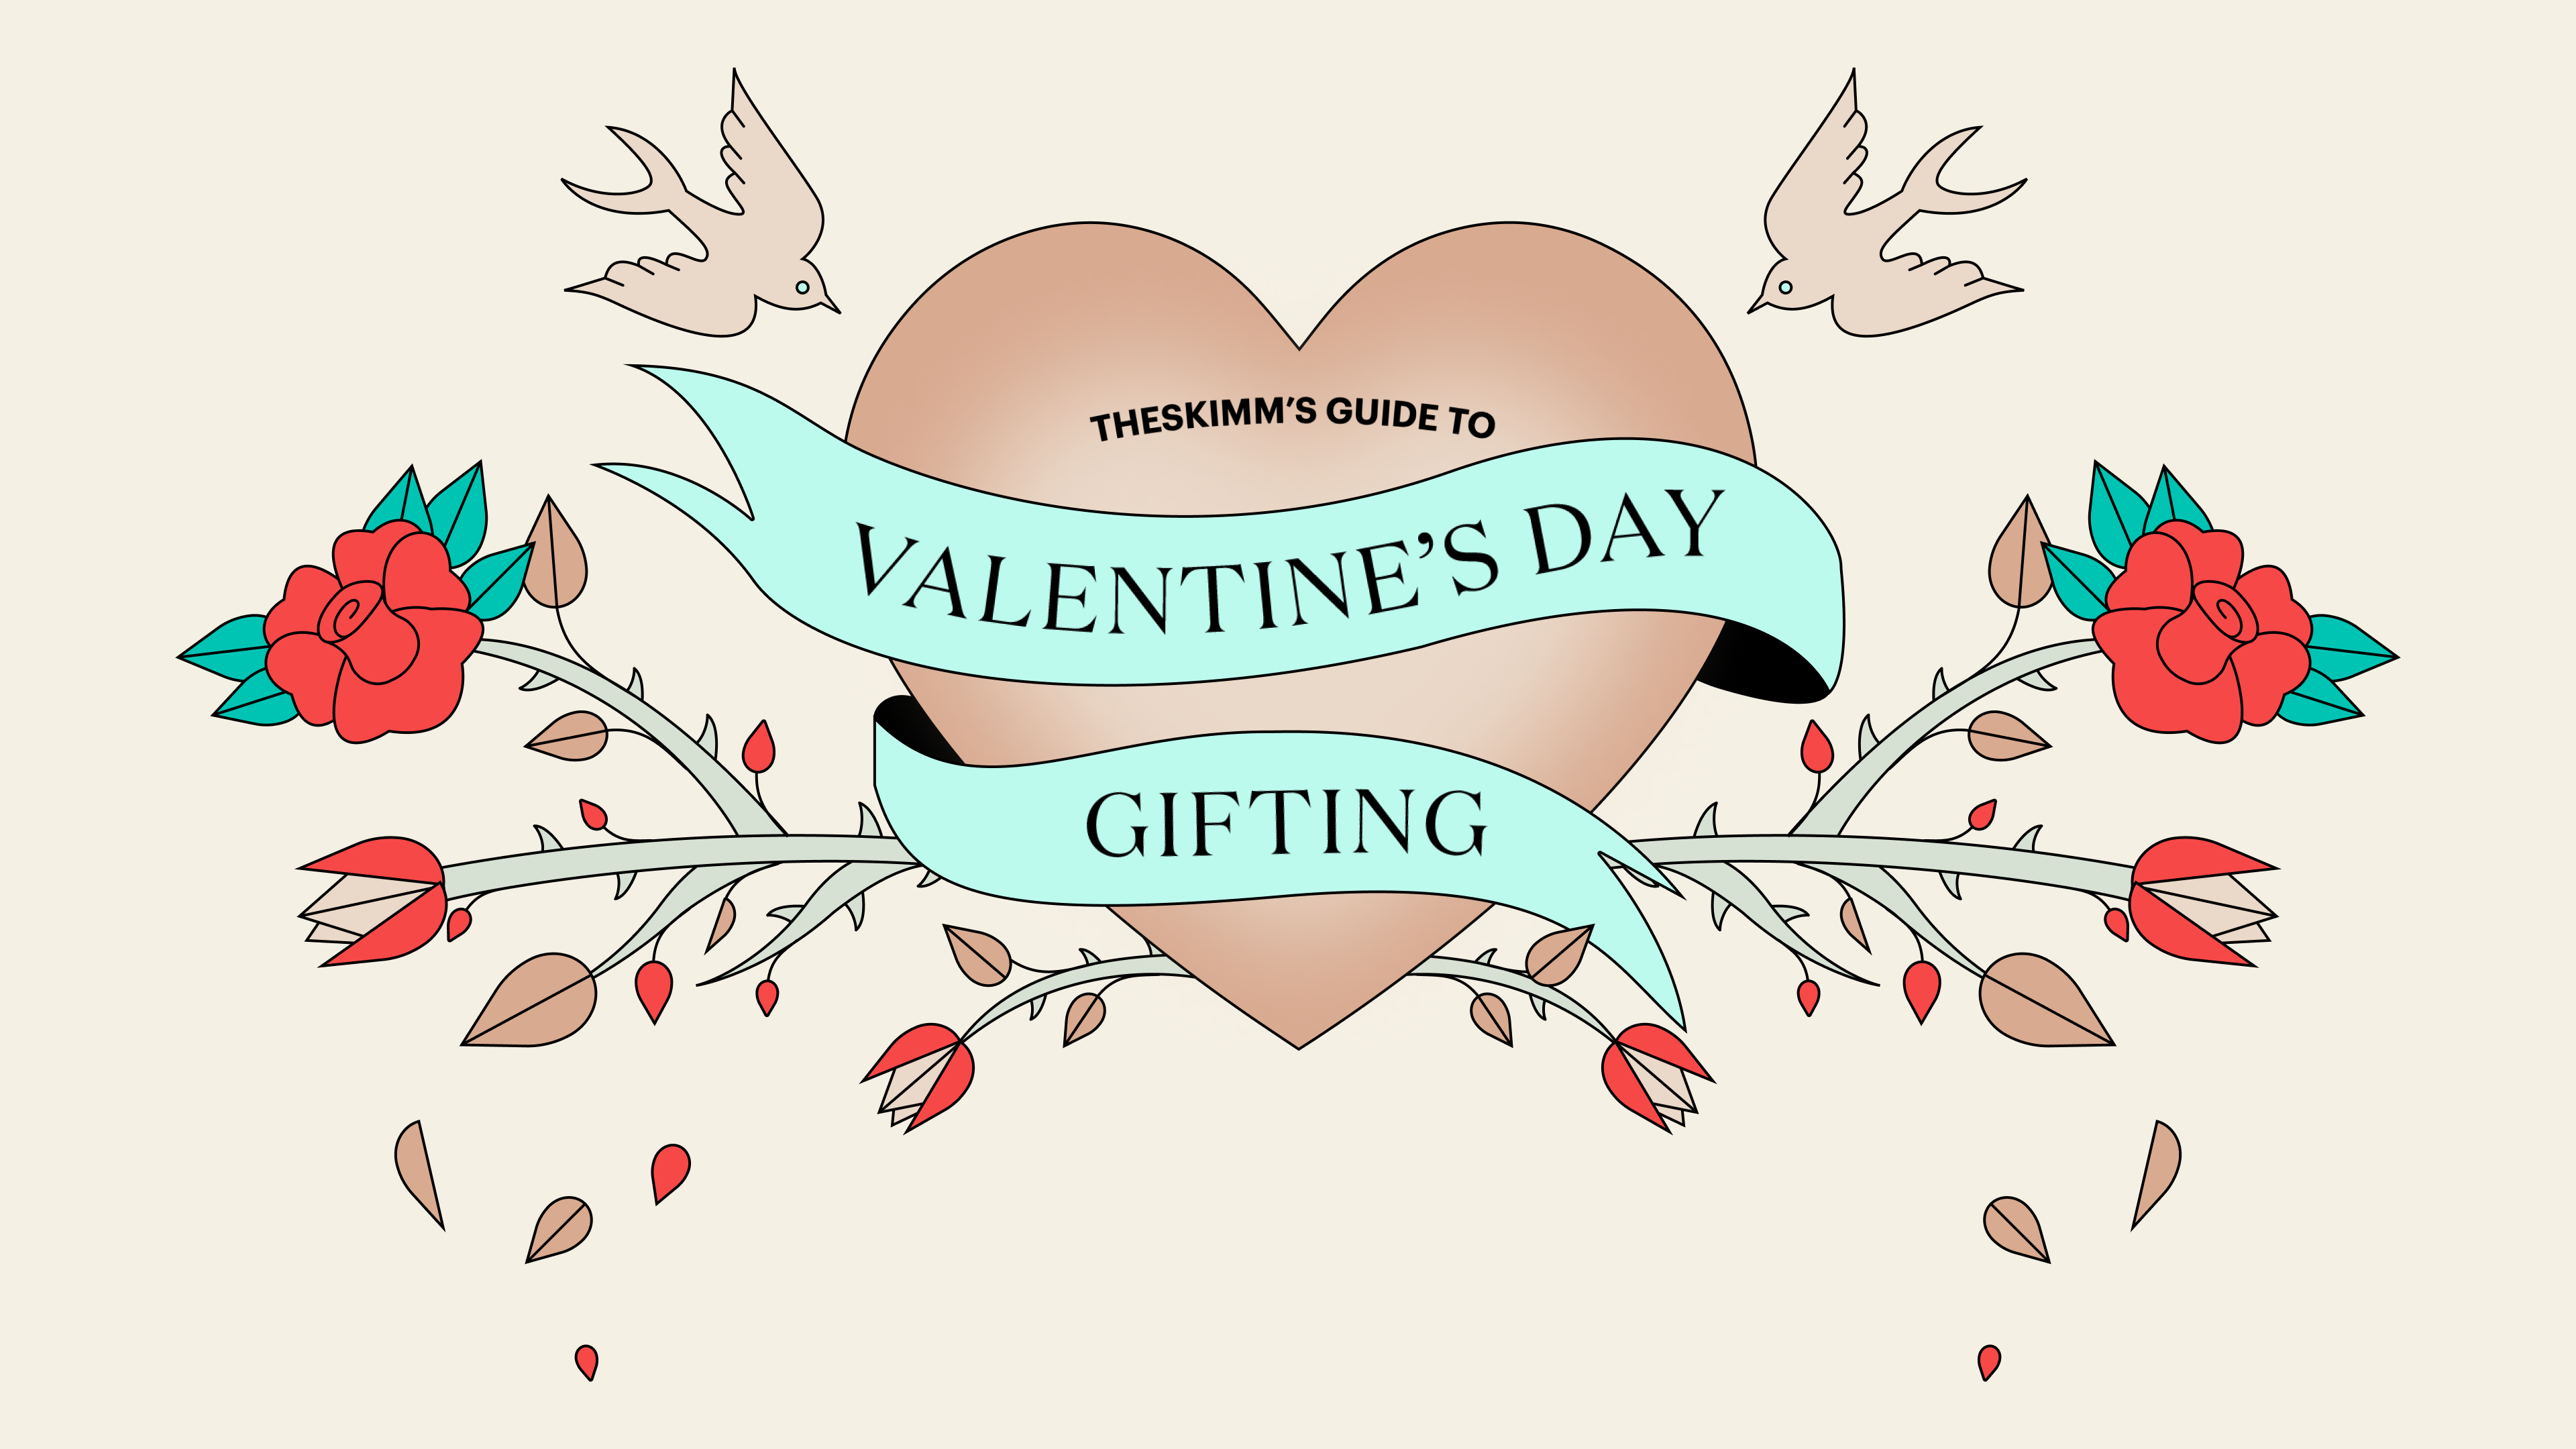 theSkimm's guide to Valentine's Day gifting